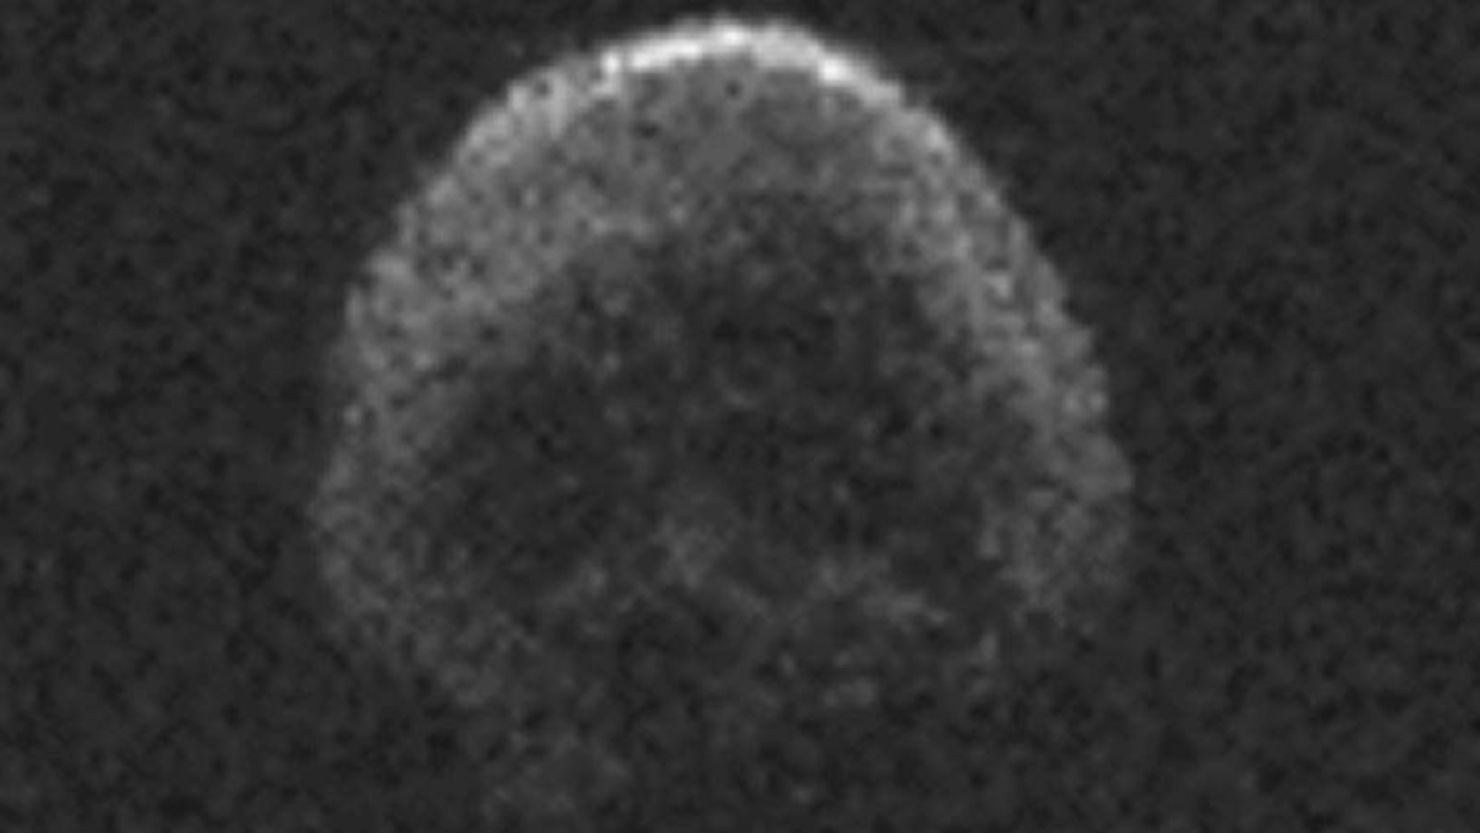 An asteroid resembling a skull will narrowly miss Earth on Halloween, October 31, 2015.